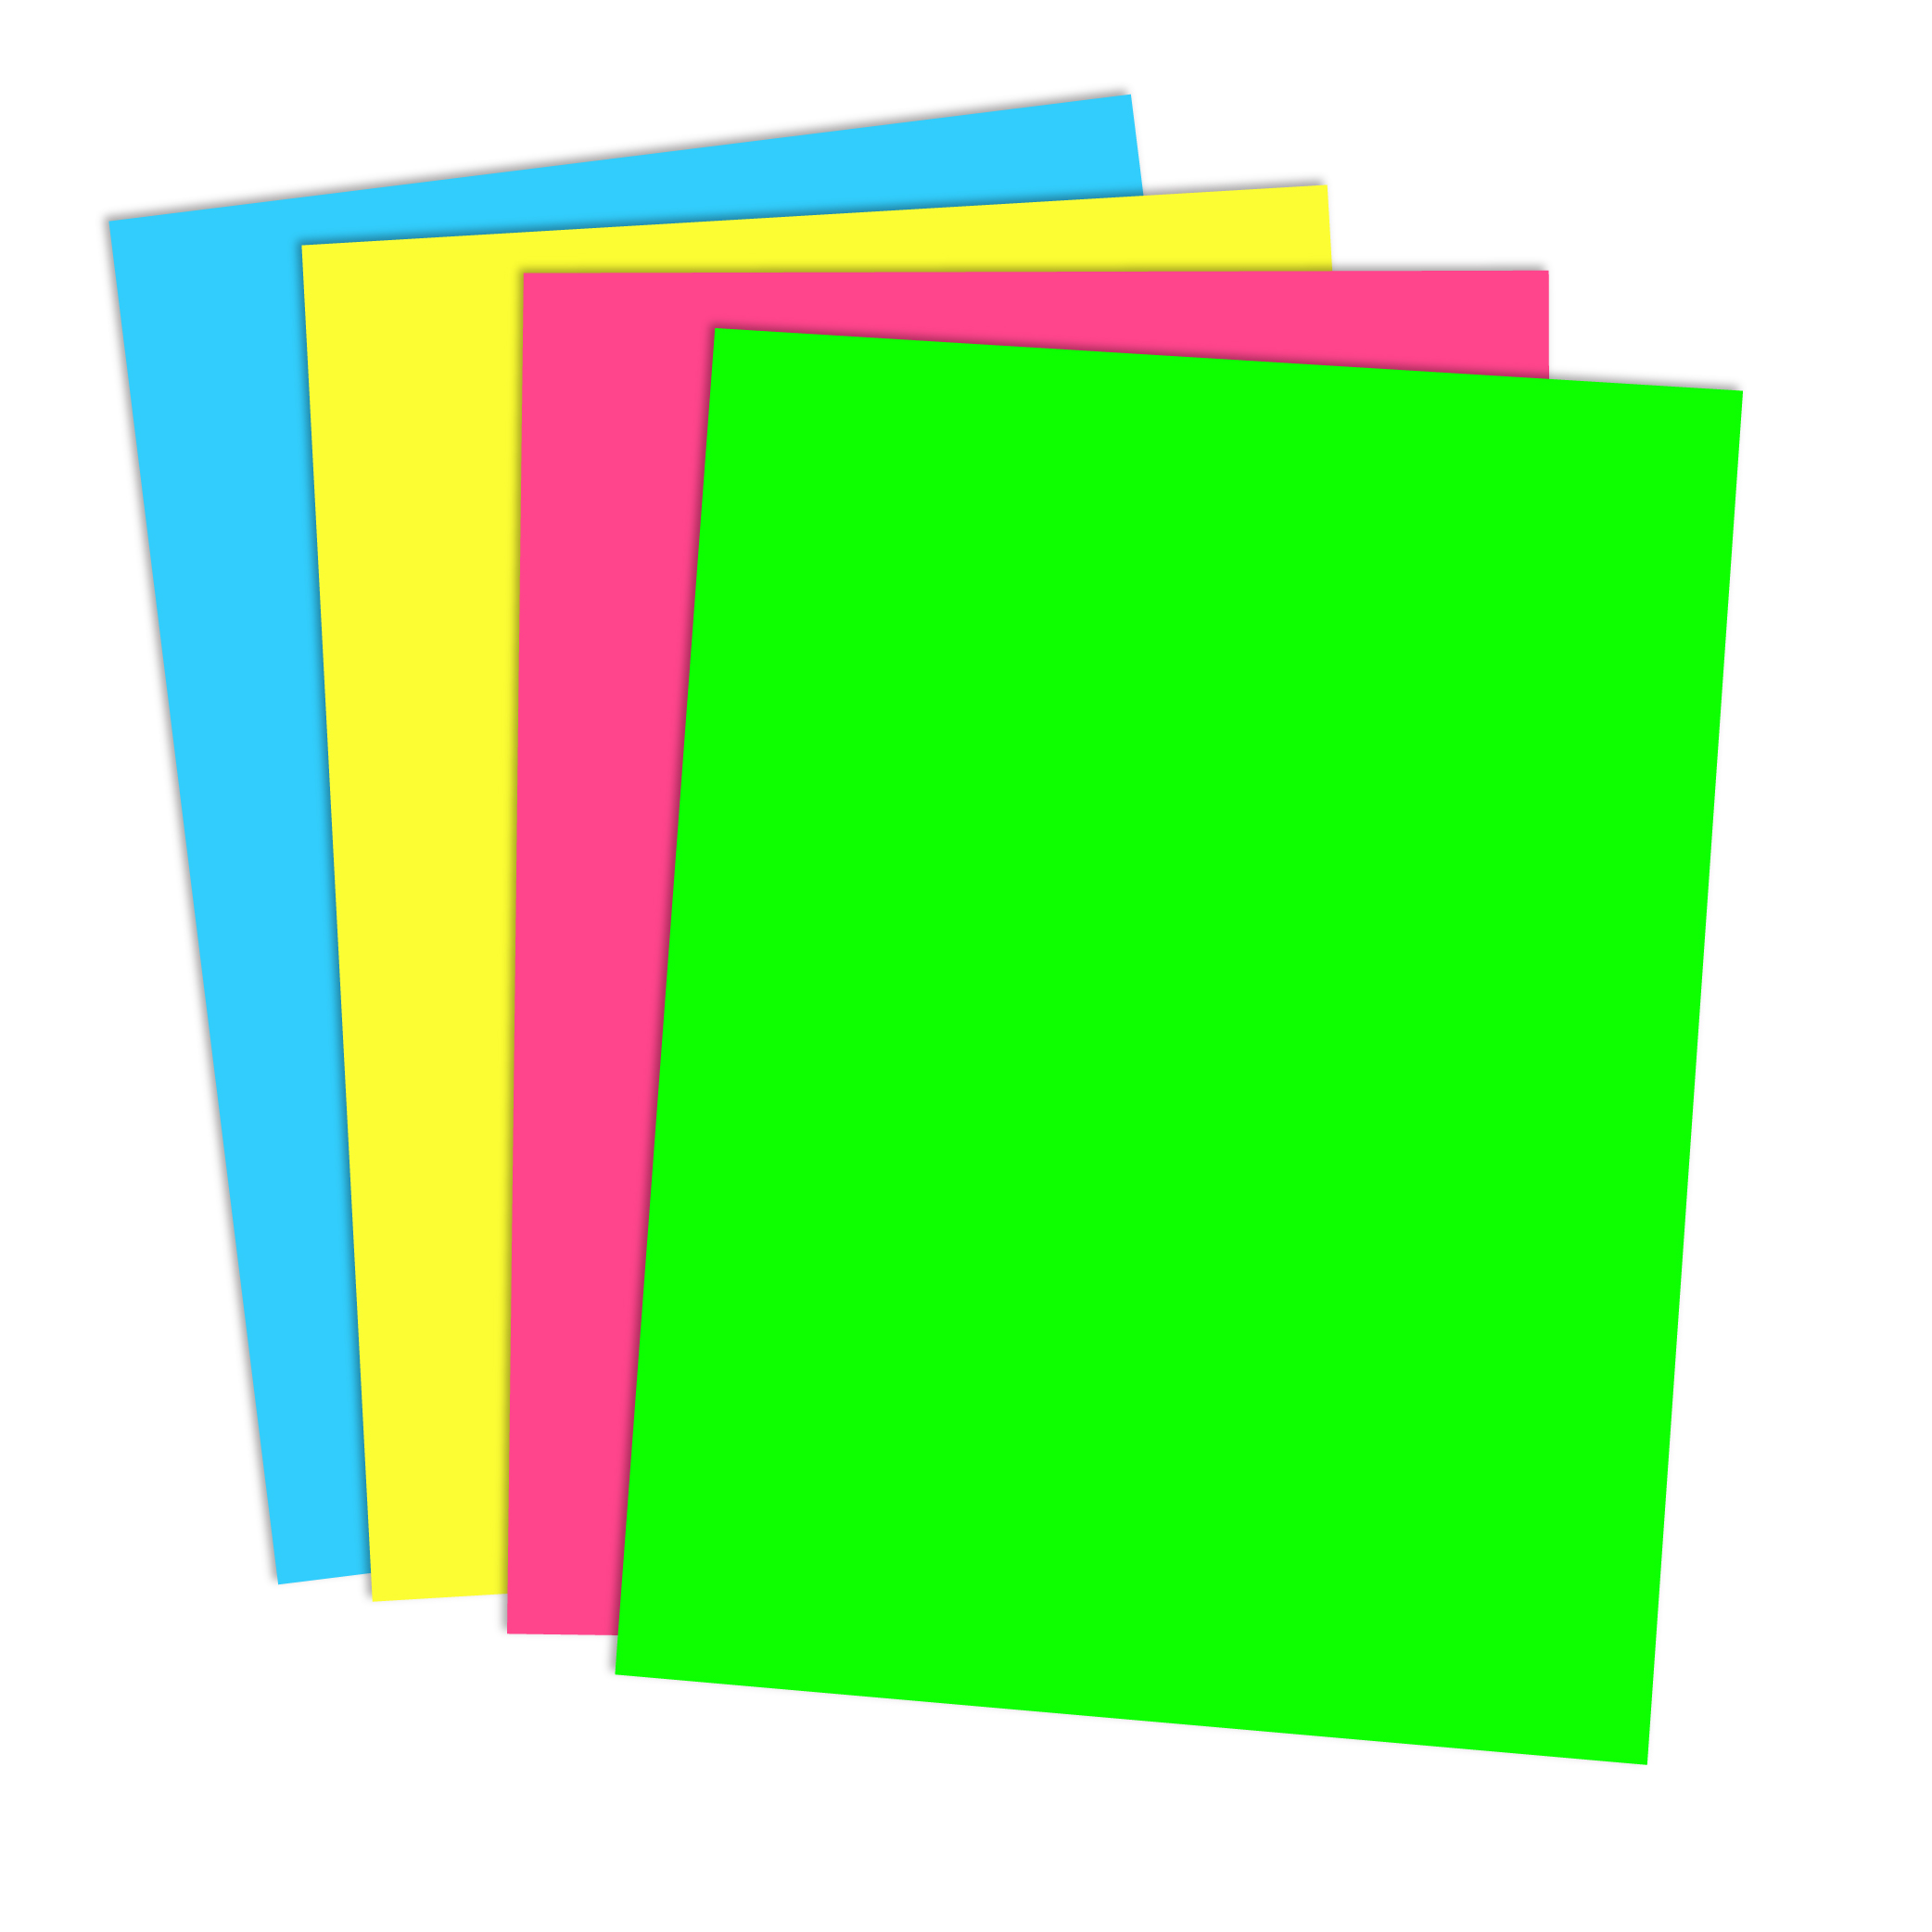 Neon Assorted Poster Board, Pink, Green, Canary, Blue, Heavyweight 17 pt,  22x28, 32/case